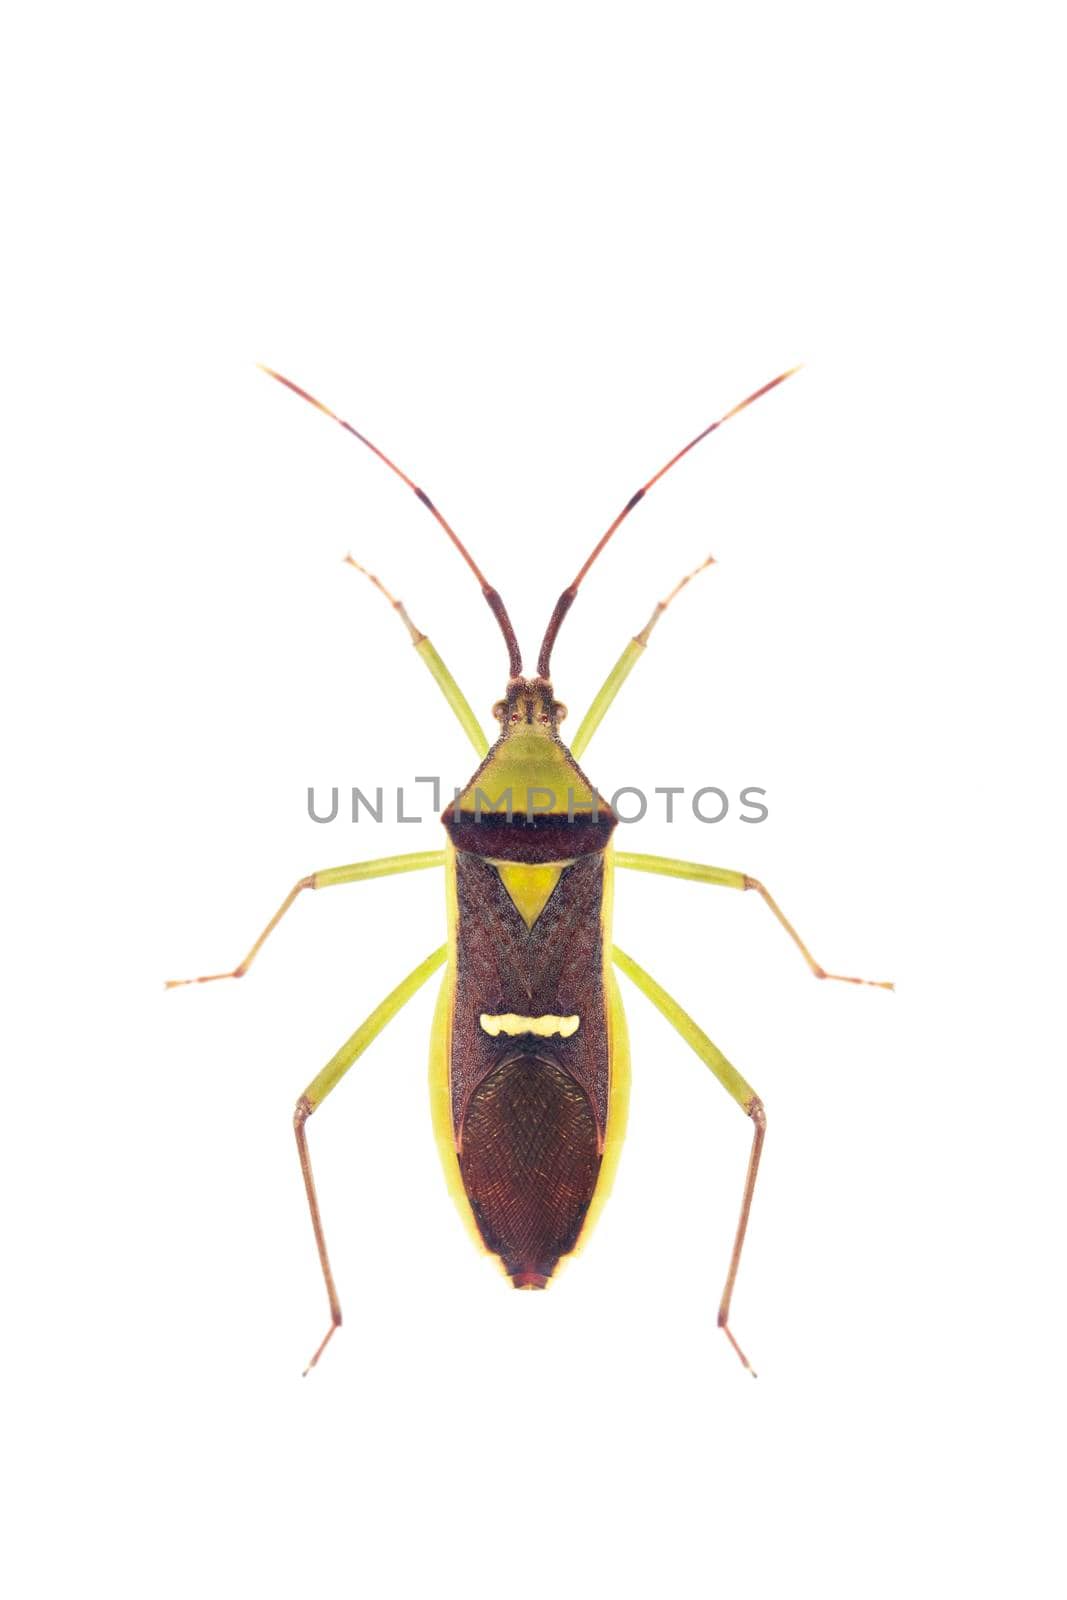 Image of green legume pod bug(Hemiptera) on white background. From top view. Insect. Animal by yod67